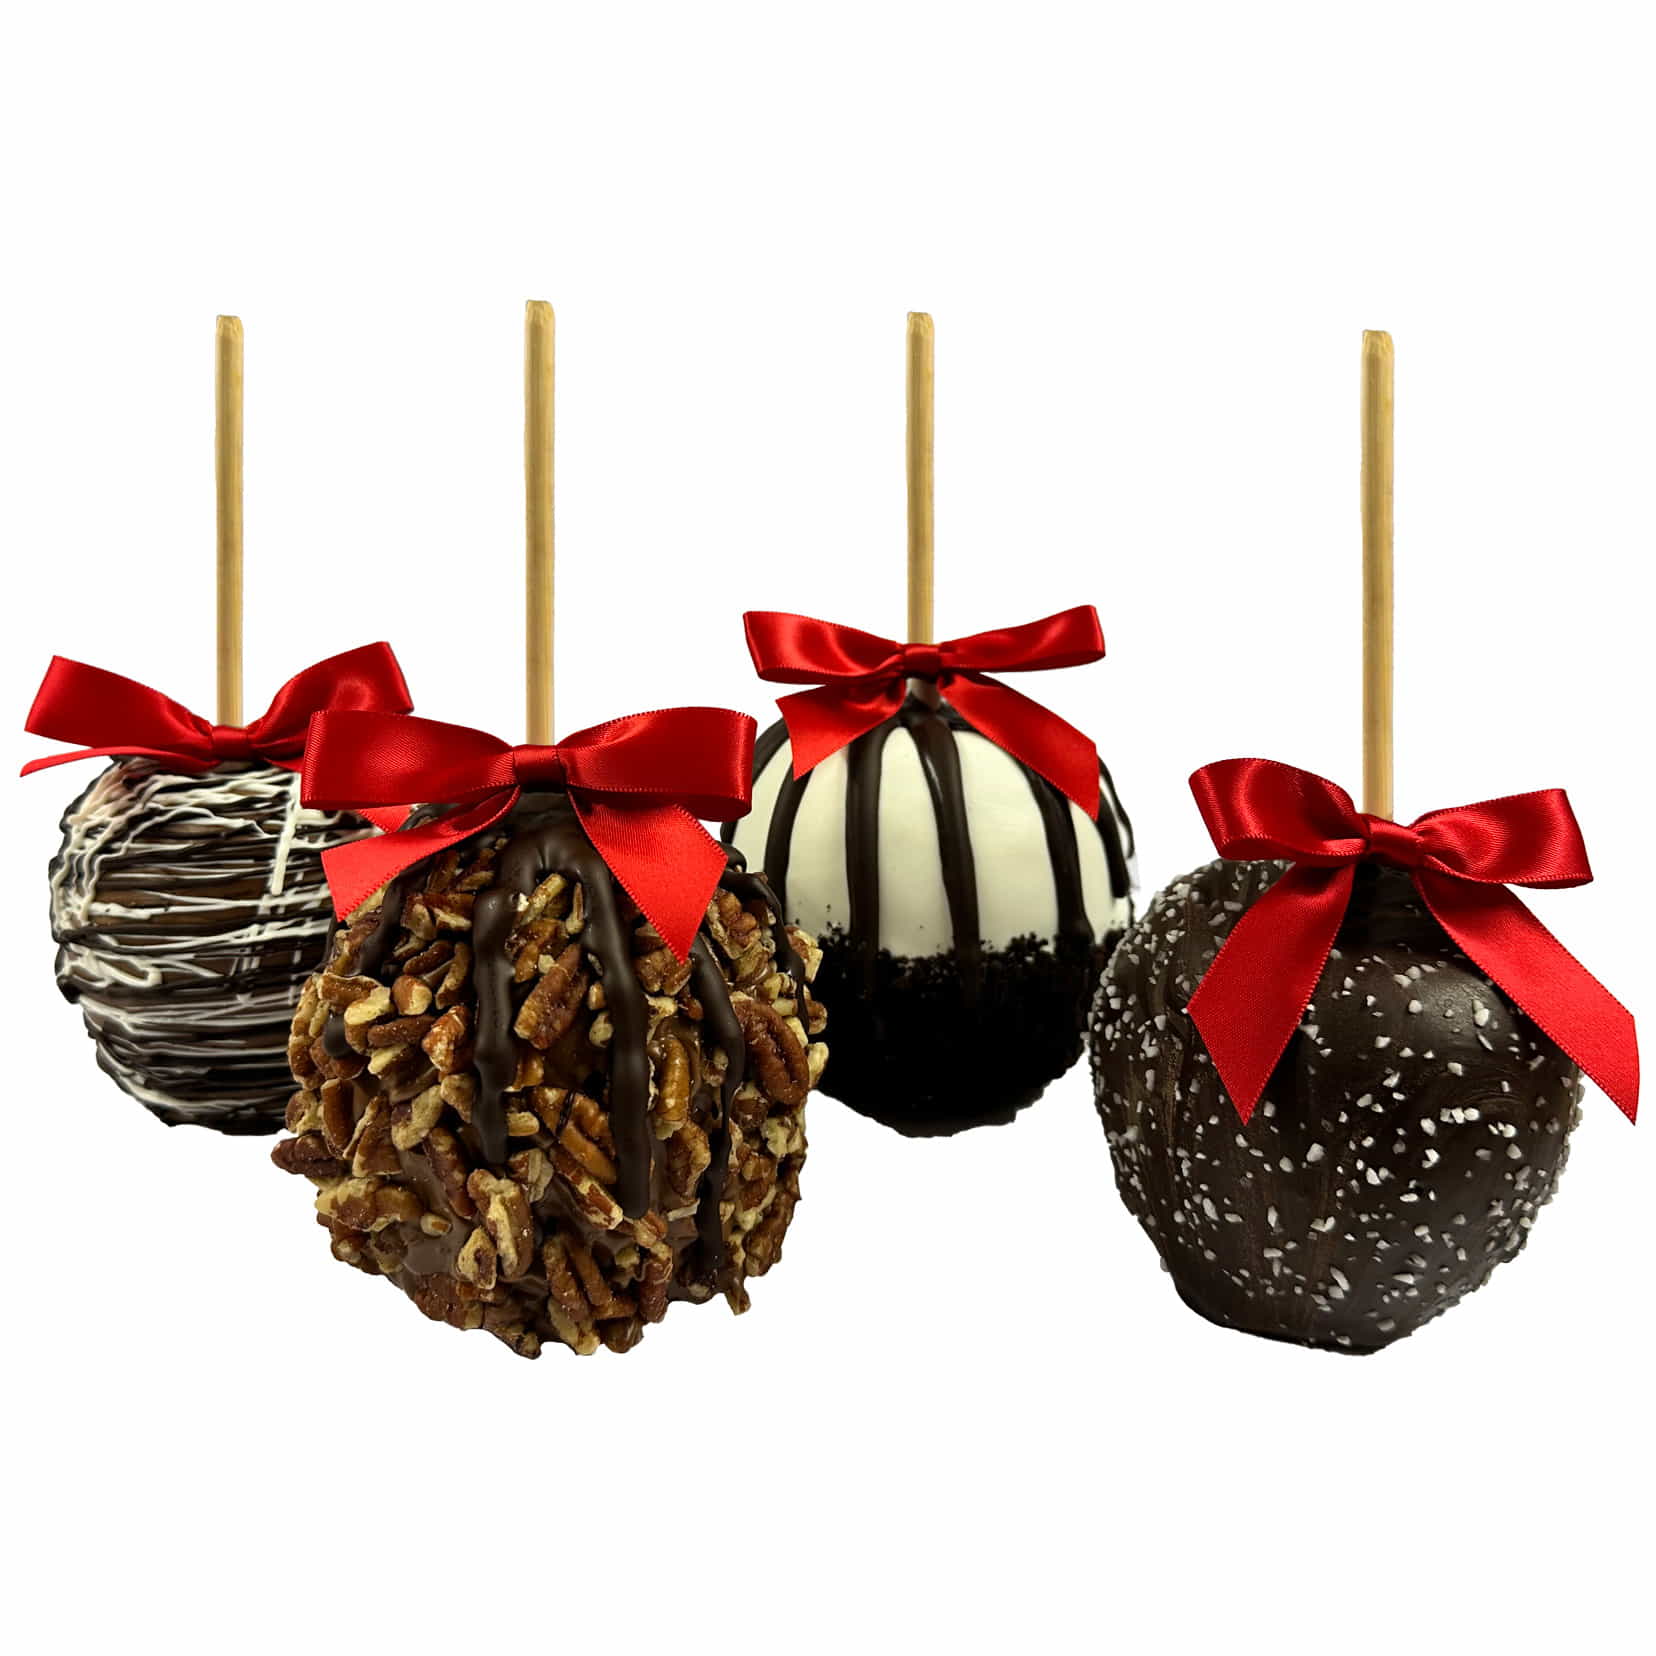 Decadent Chocolate Covered Caramel Apple Gifts